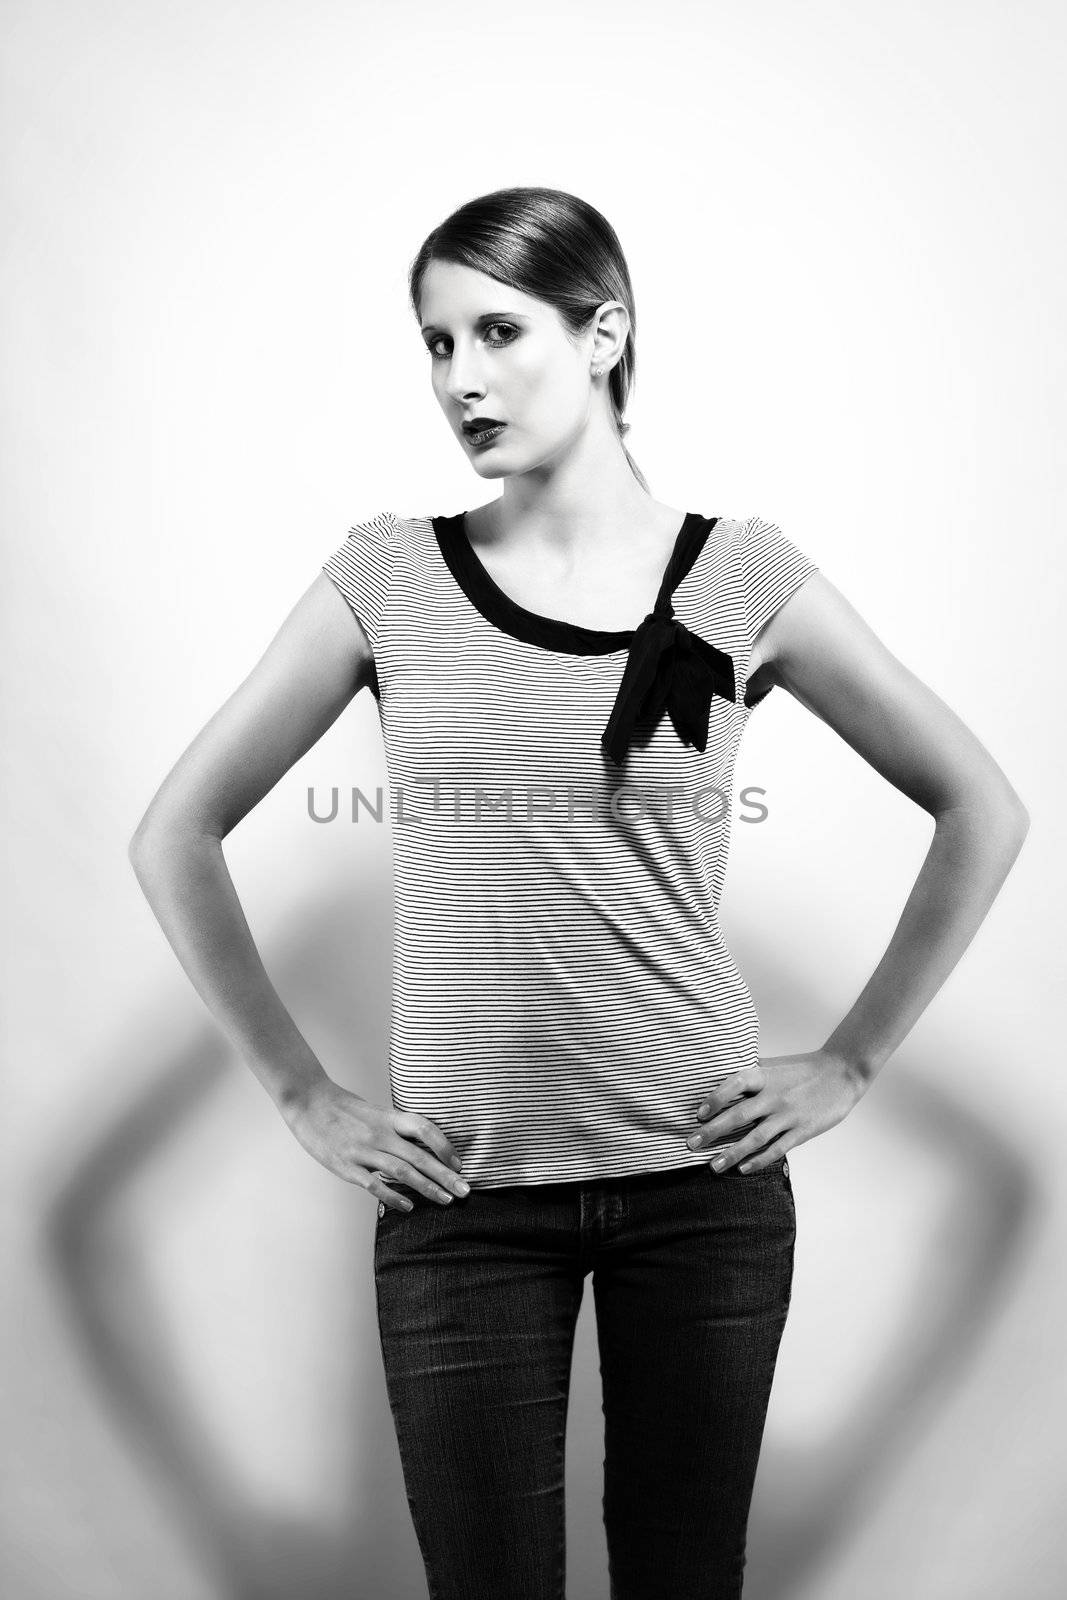 beautiful woman with jeans in black and white hight contrast on white background